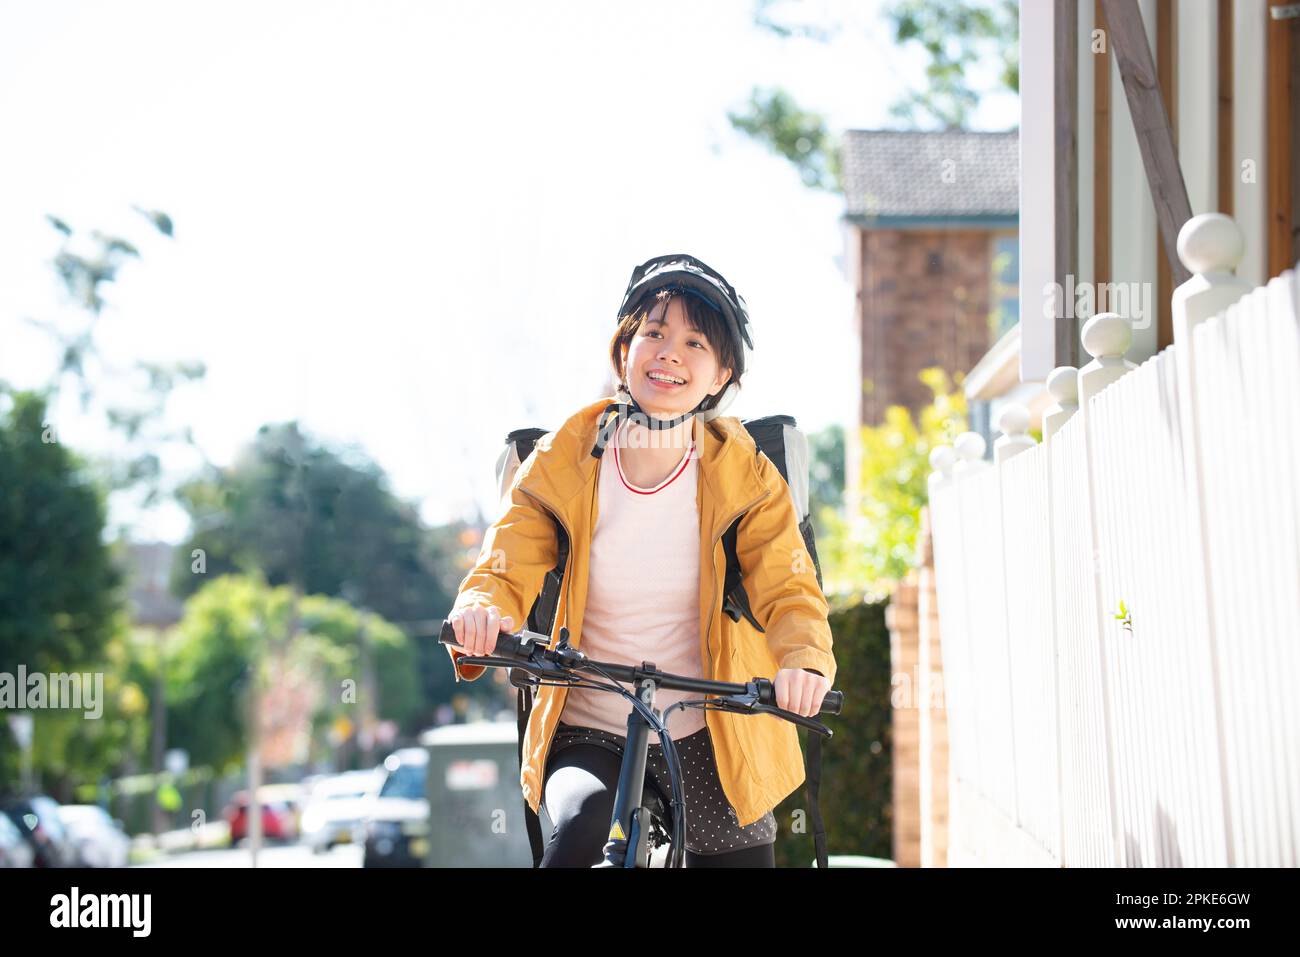 Food delivery woman on a bicycle Stock Photo